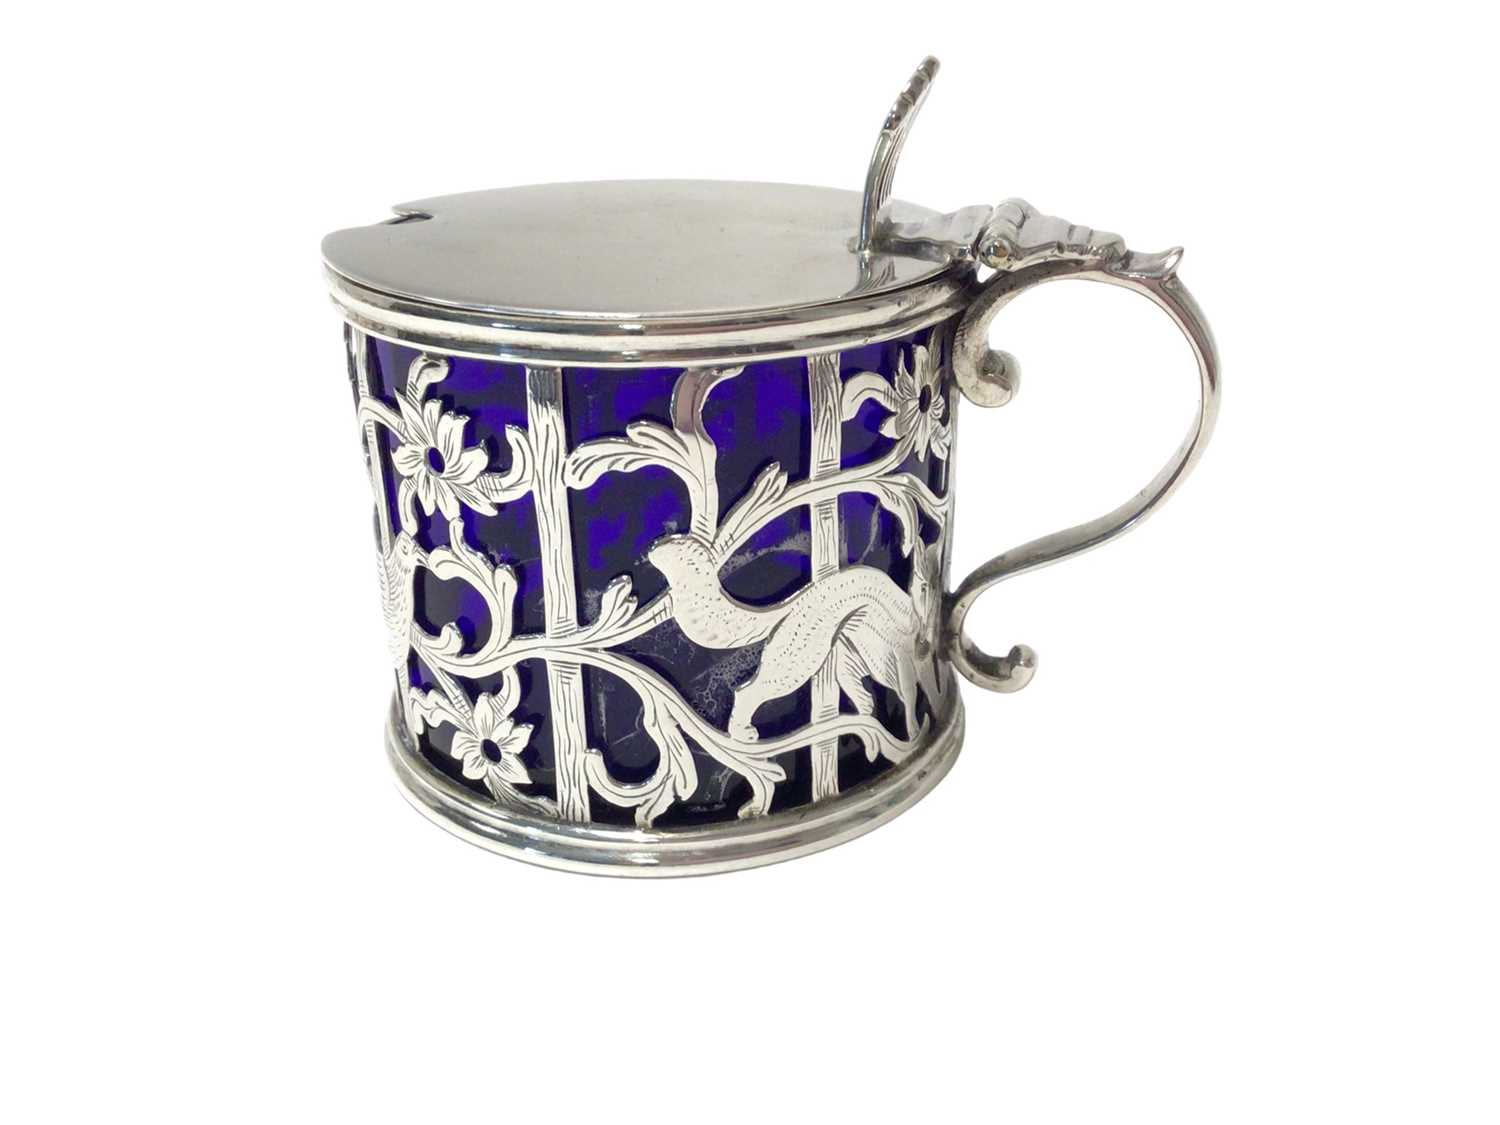 George III silver mustard pot with bird and animal decoration - Image 3 of 6